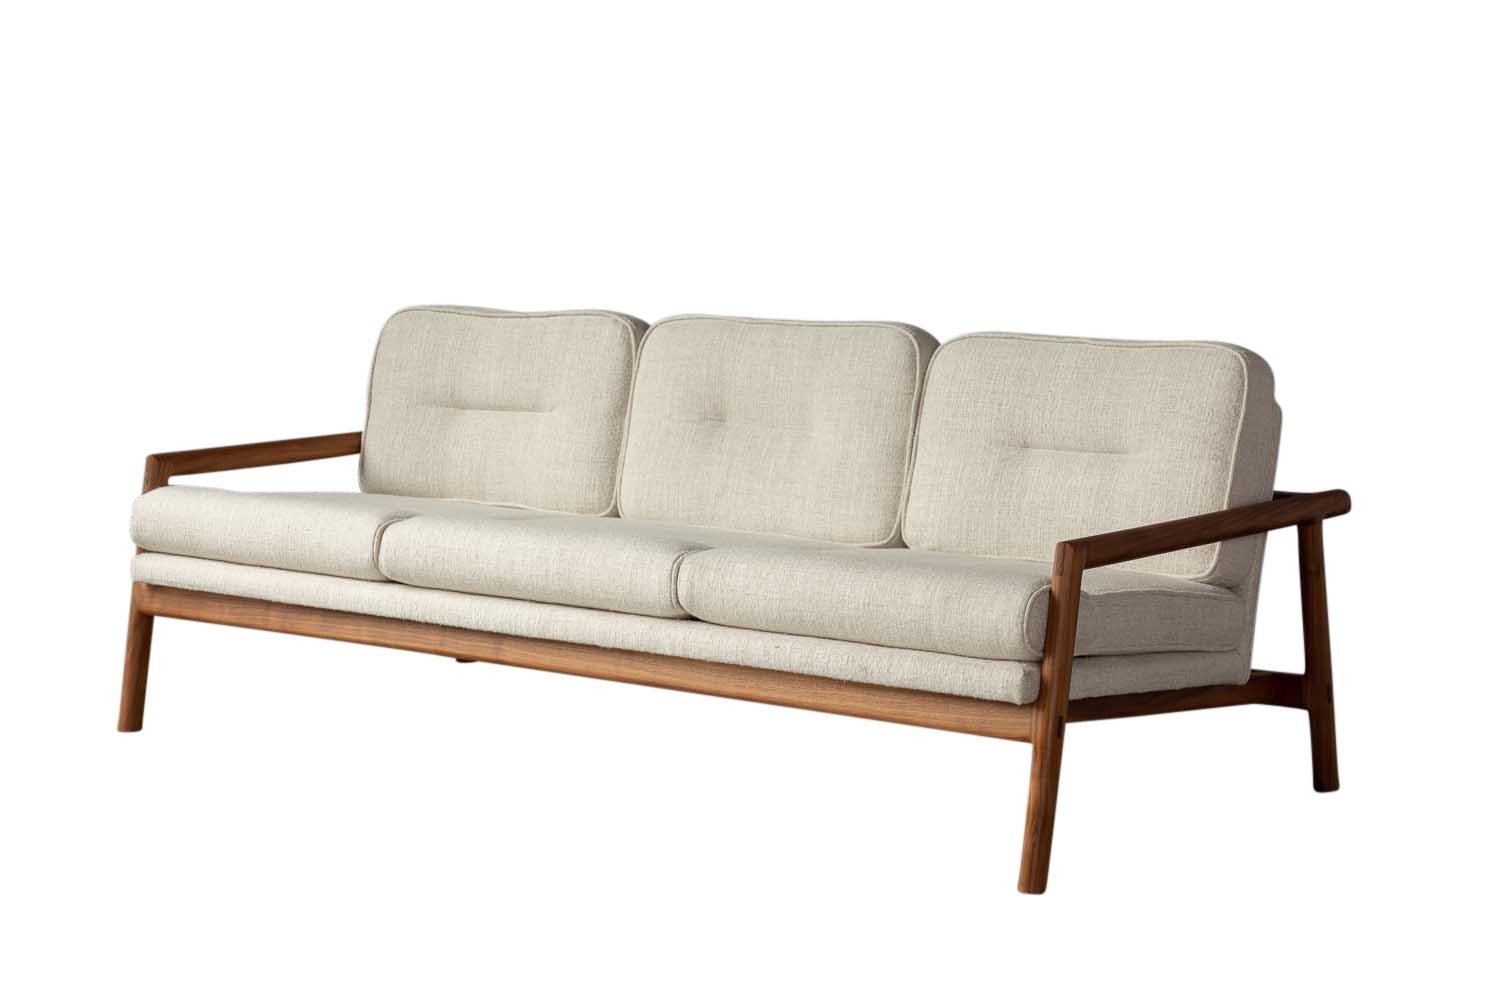 American Handcrafted Walnut Moresby Sofa with Custom Linen or Leather Upholstery For Sale